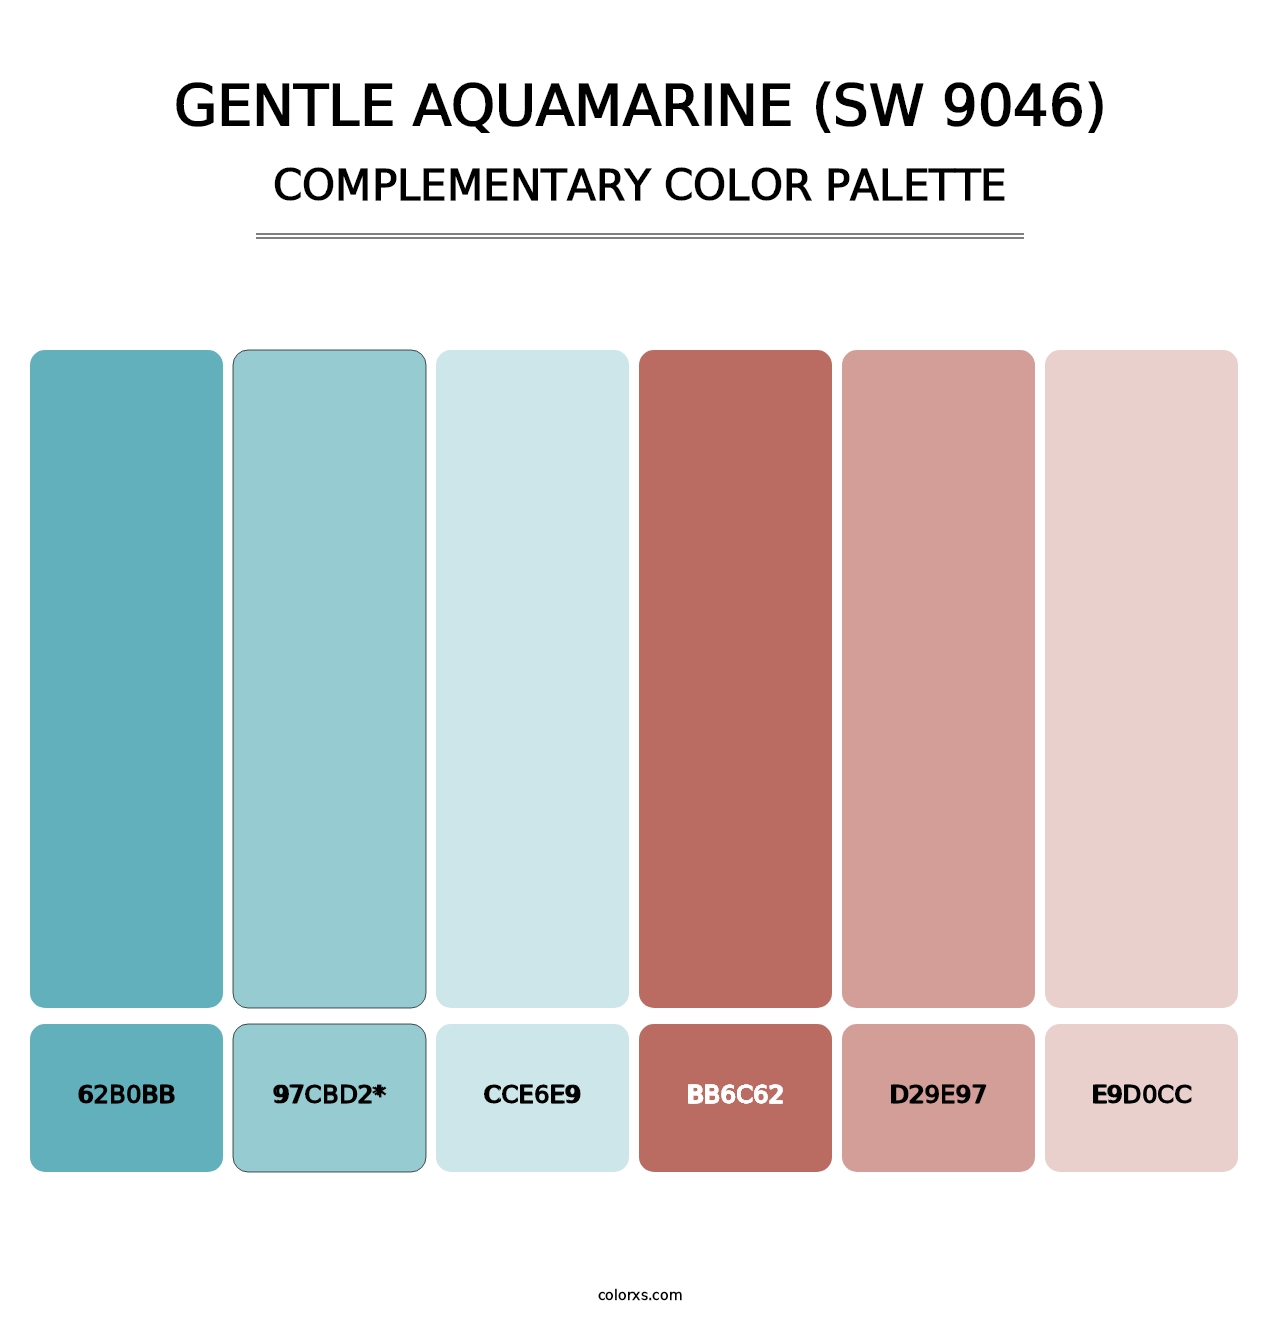 Gentle Aquamarine (SW 9046) - Complementary Color Palette